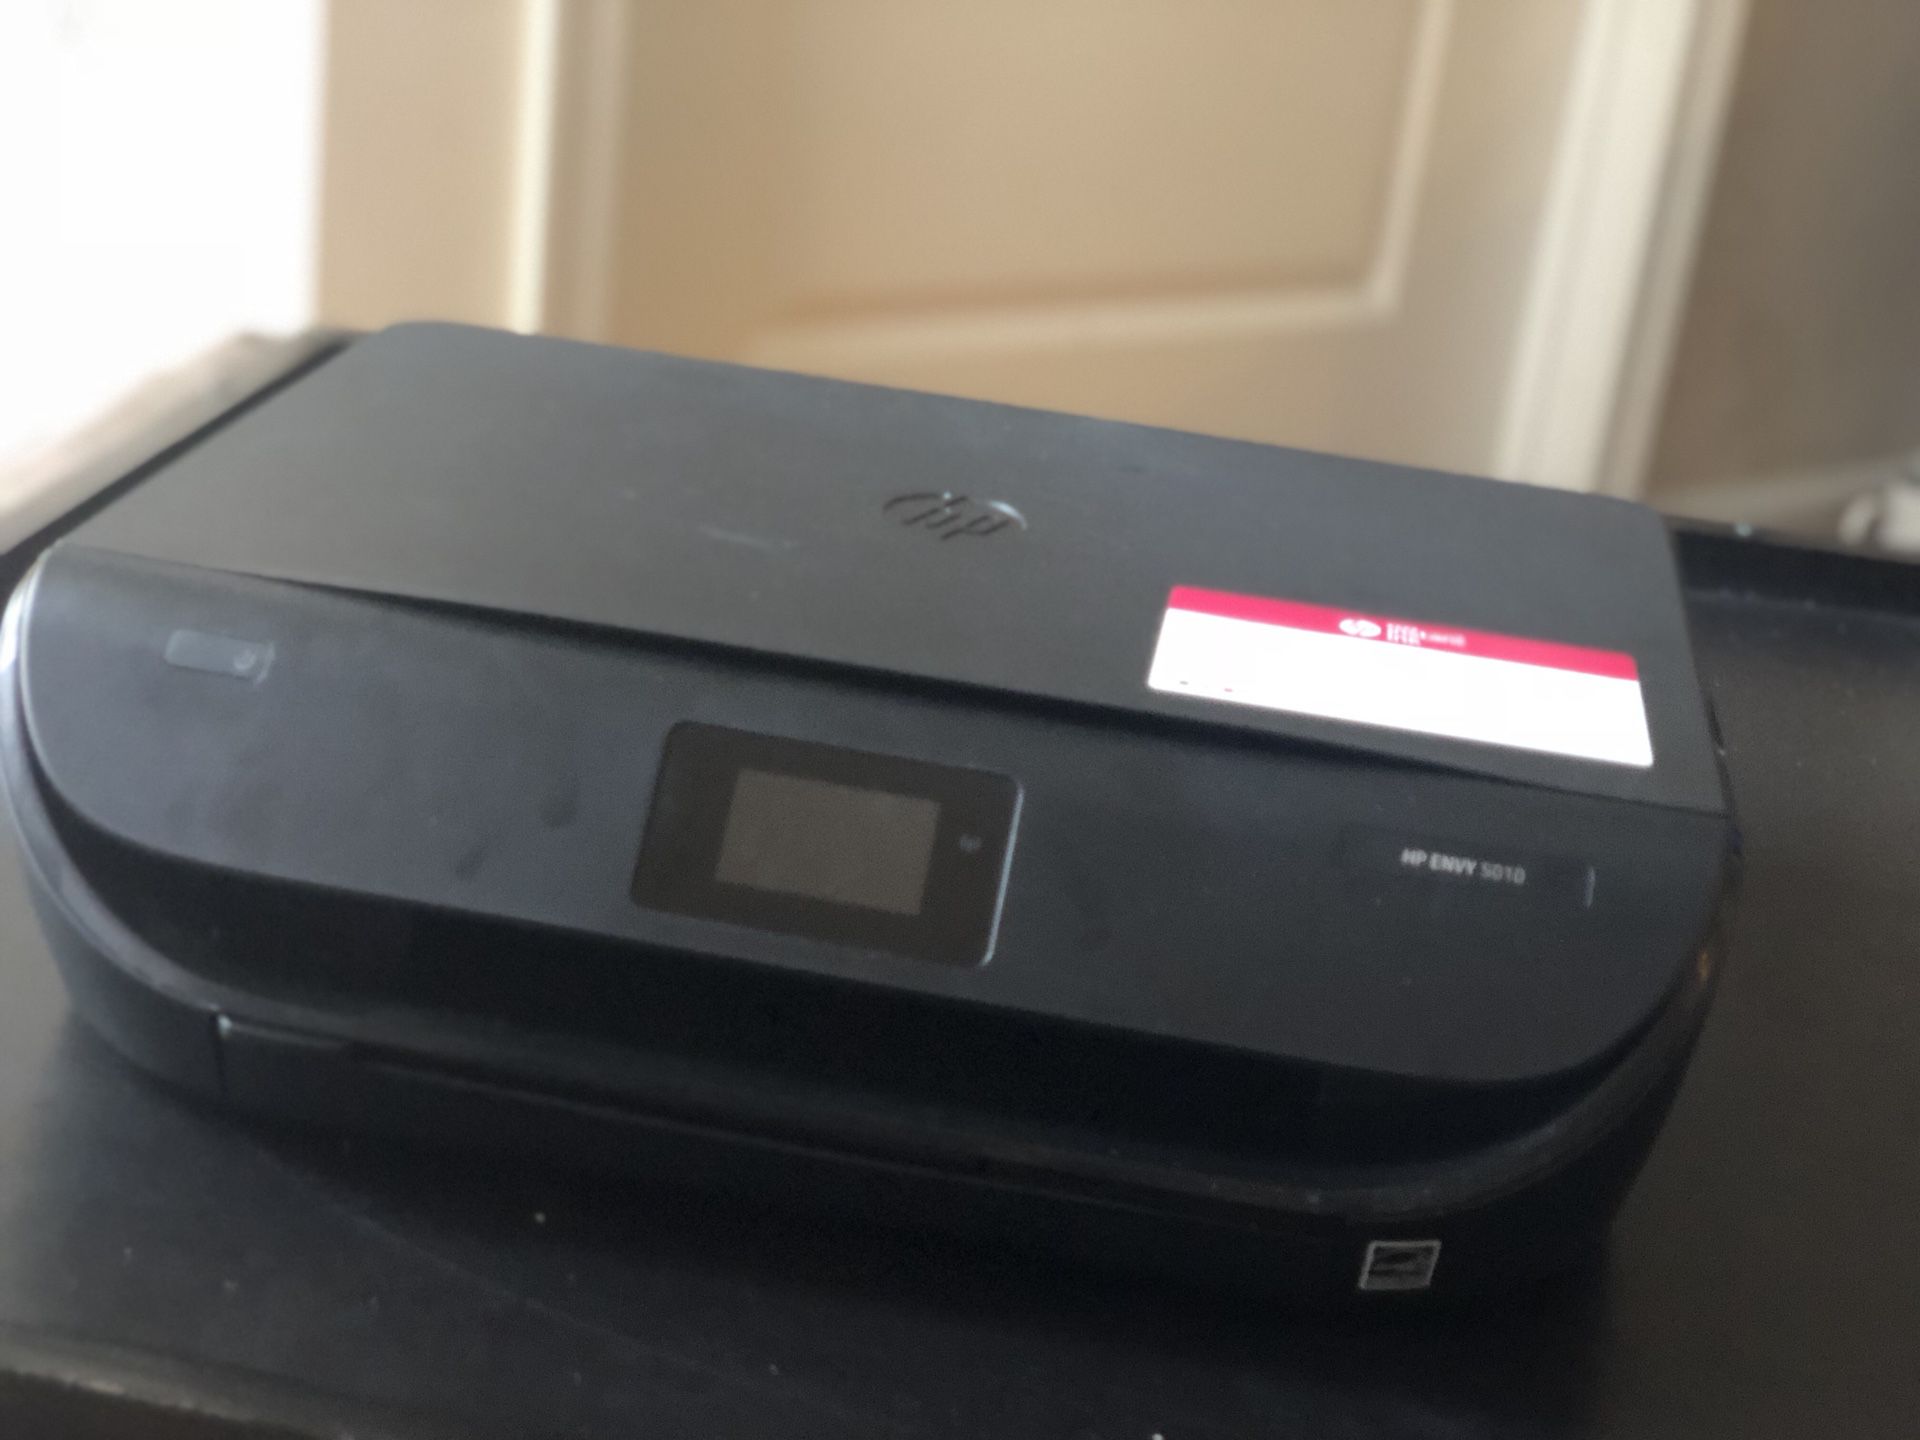 HP 5010 printer like new + copy papers for Sale in Fairfax, VA - OfferUp